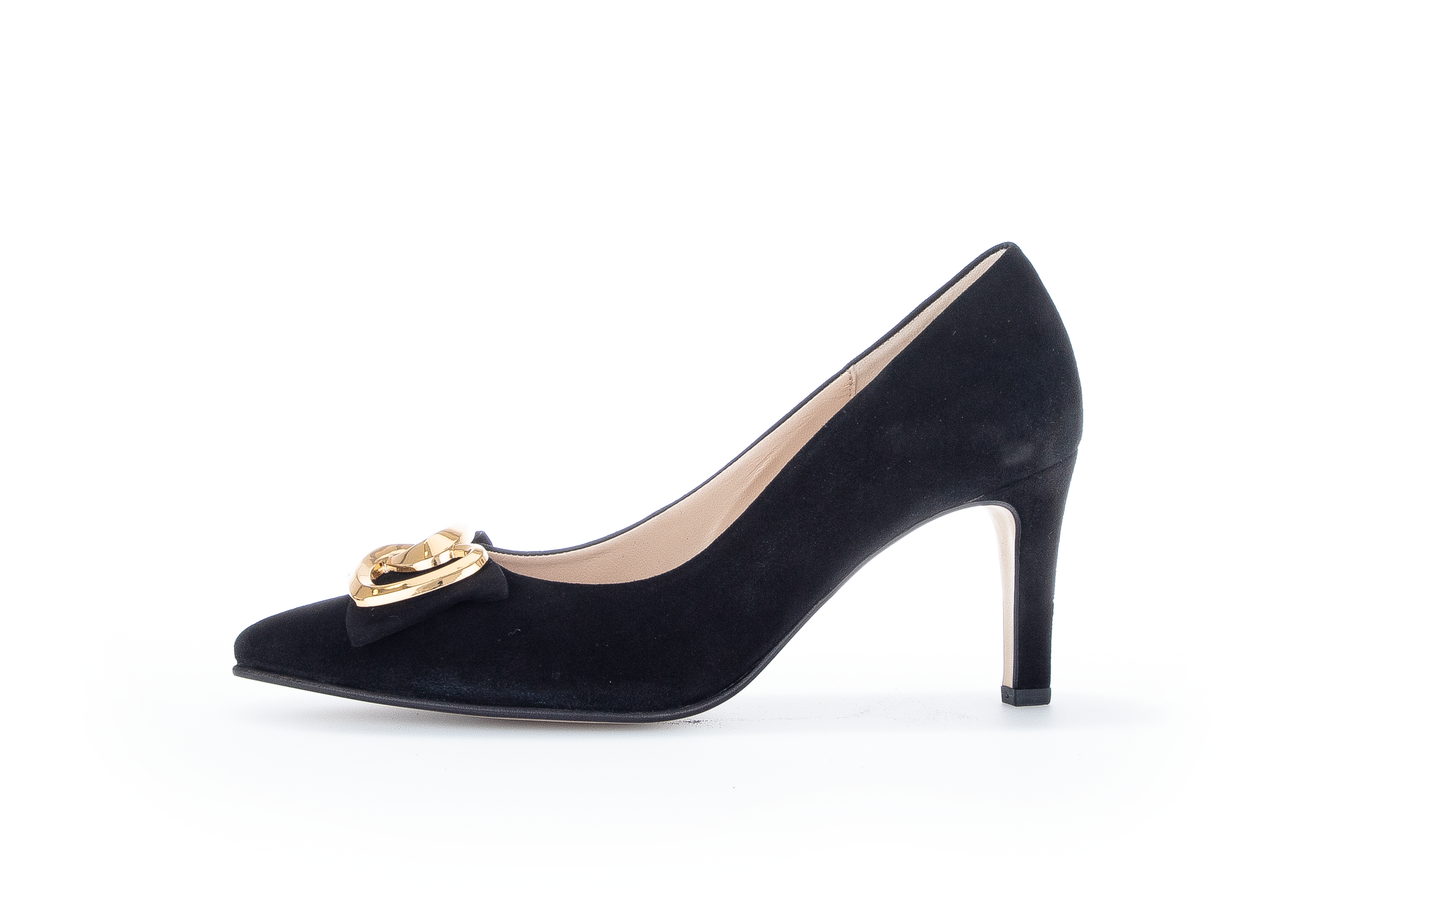 Gabor 91.381.17 Black Suede Heels with Gold Bow Detailing